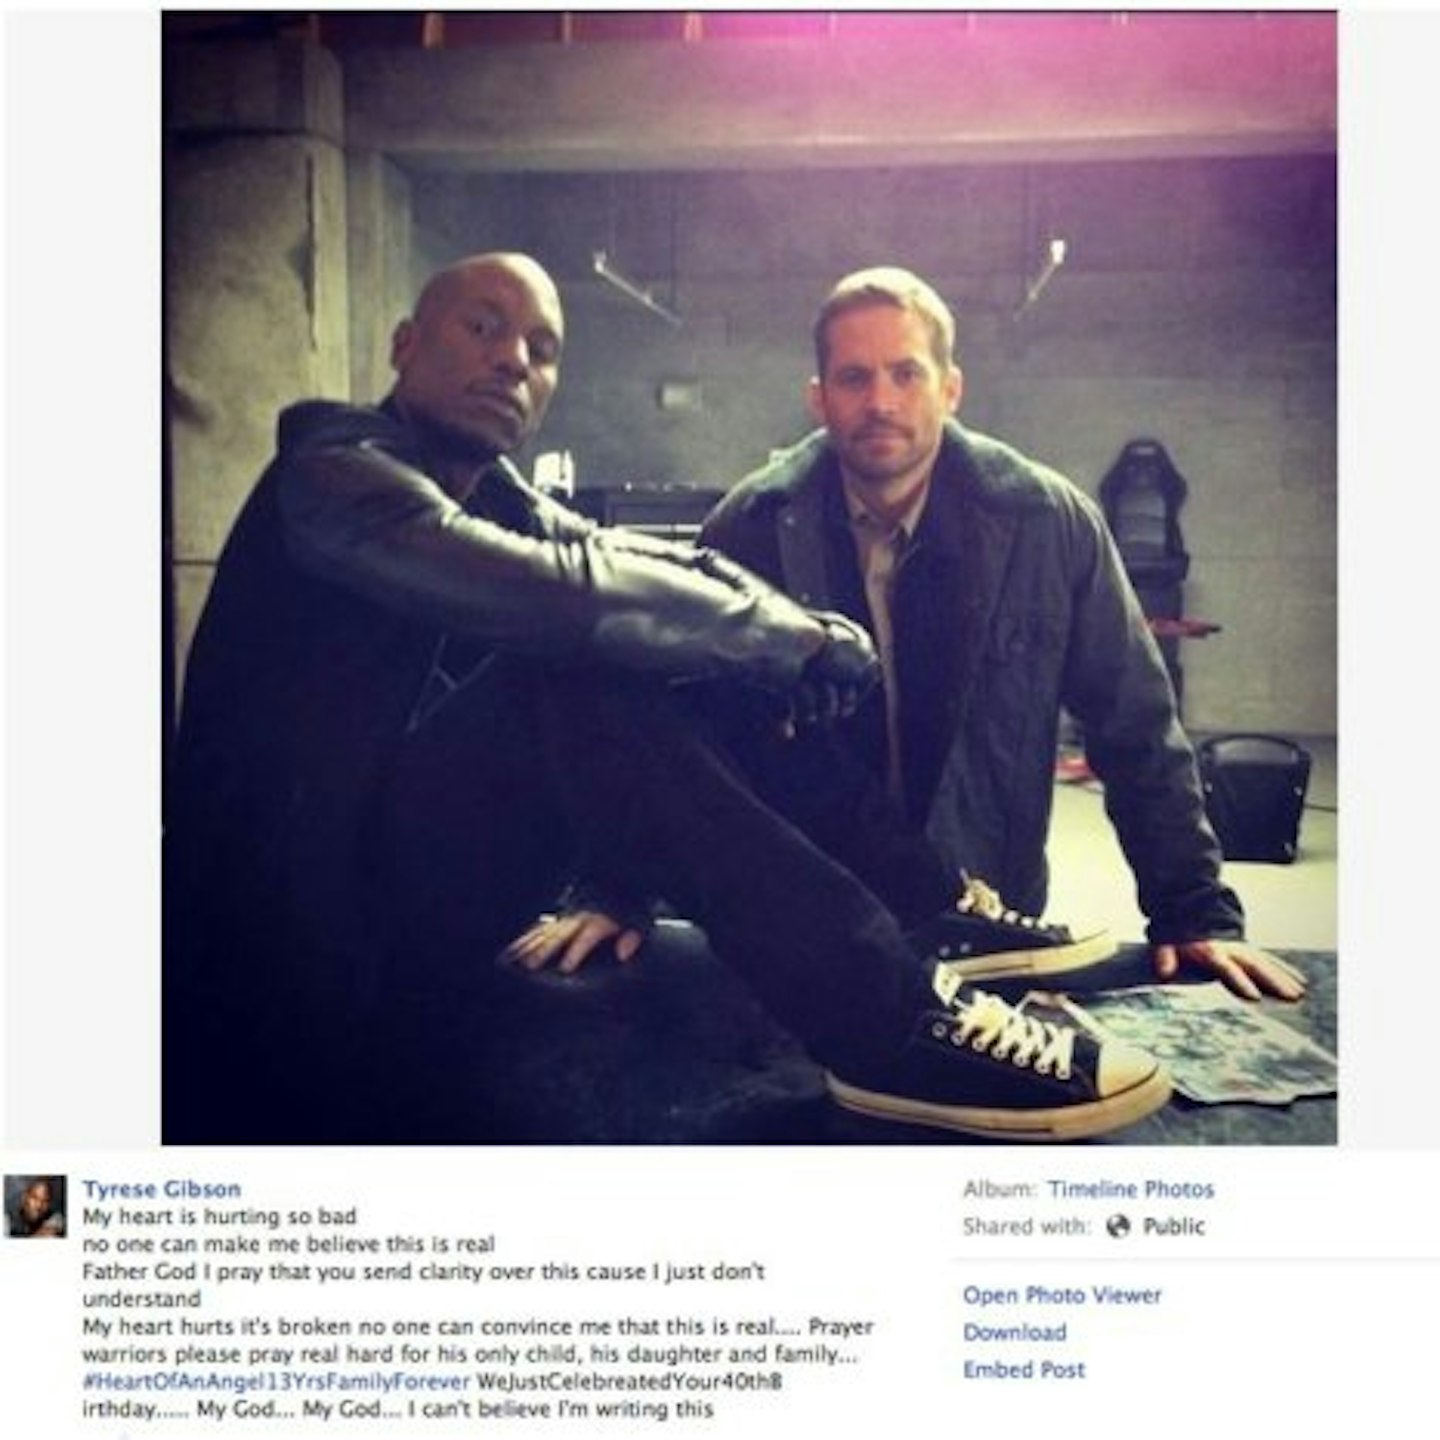 Tyrese Gibson, a good friend of Paul Walker, posted the above tribute on Facebook